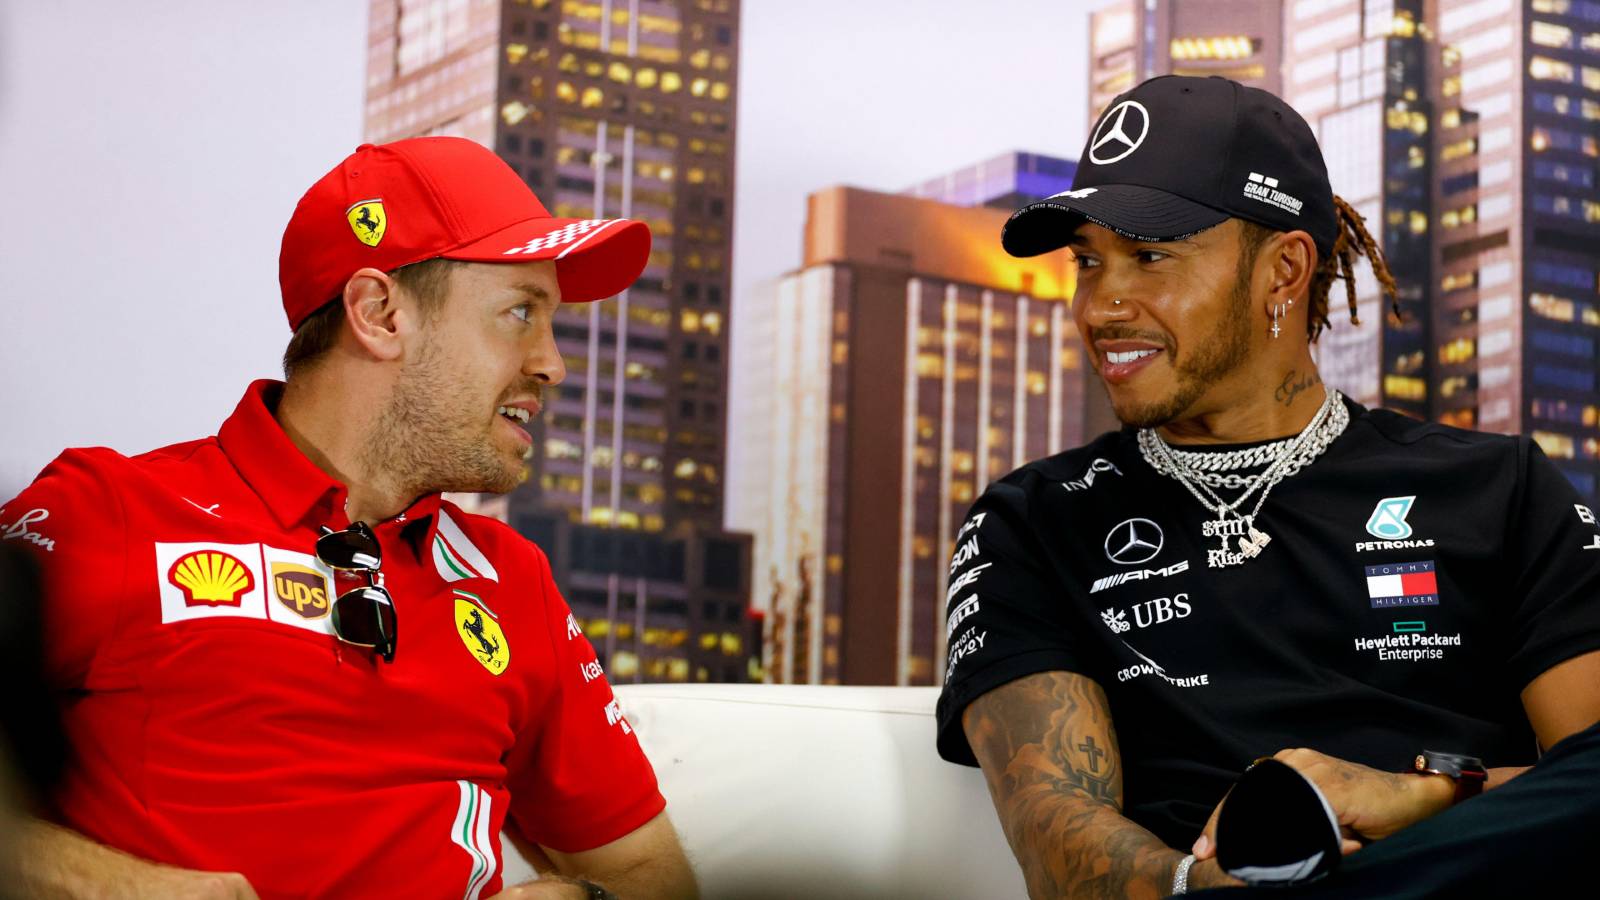 Sebastian Vettel and Lewis Hamilton smile at each other. Melbourne March 2020.